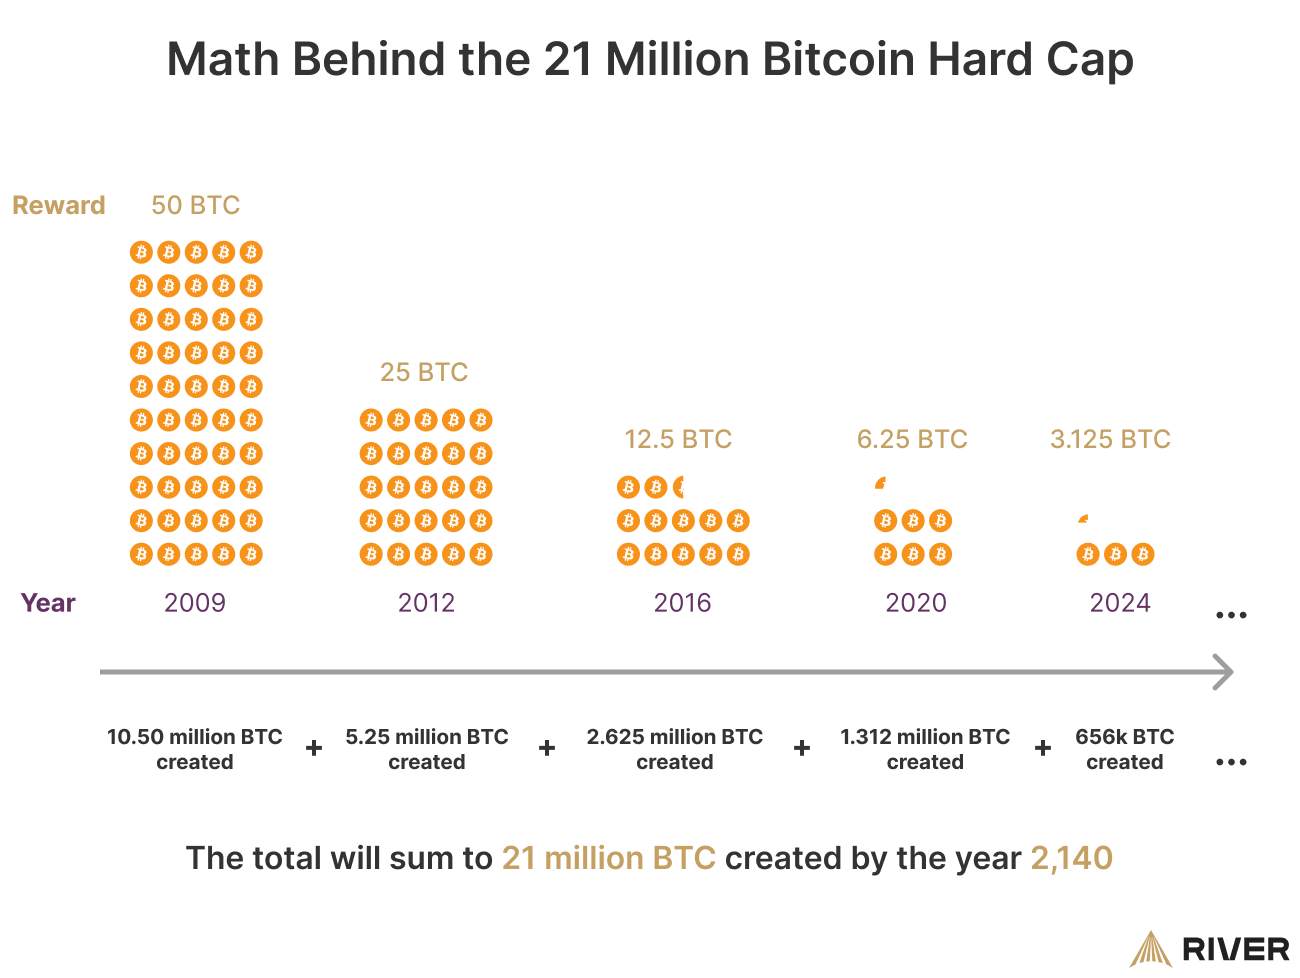 What Will Happen After All 21 Million Bitcoins Are Mined?